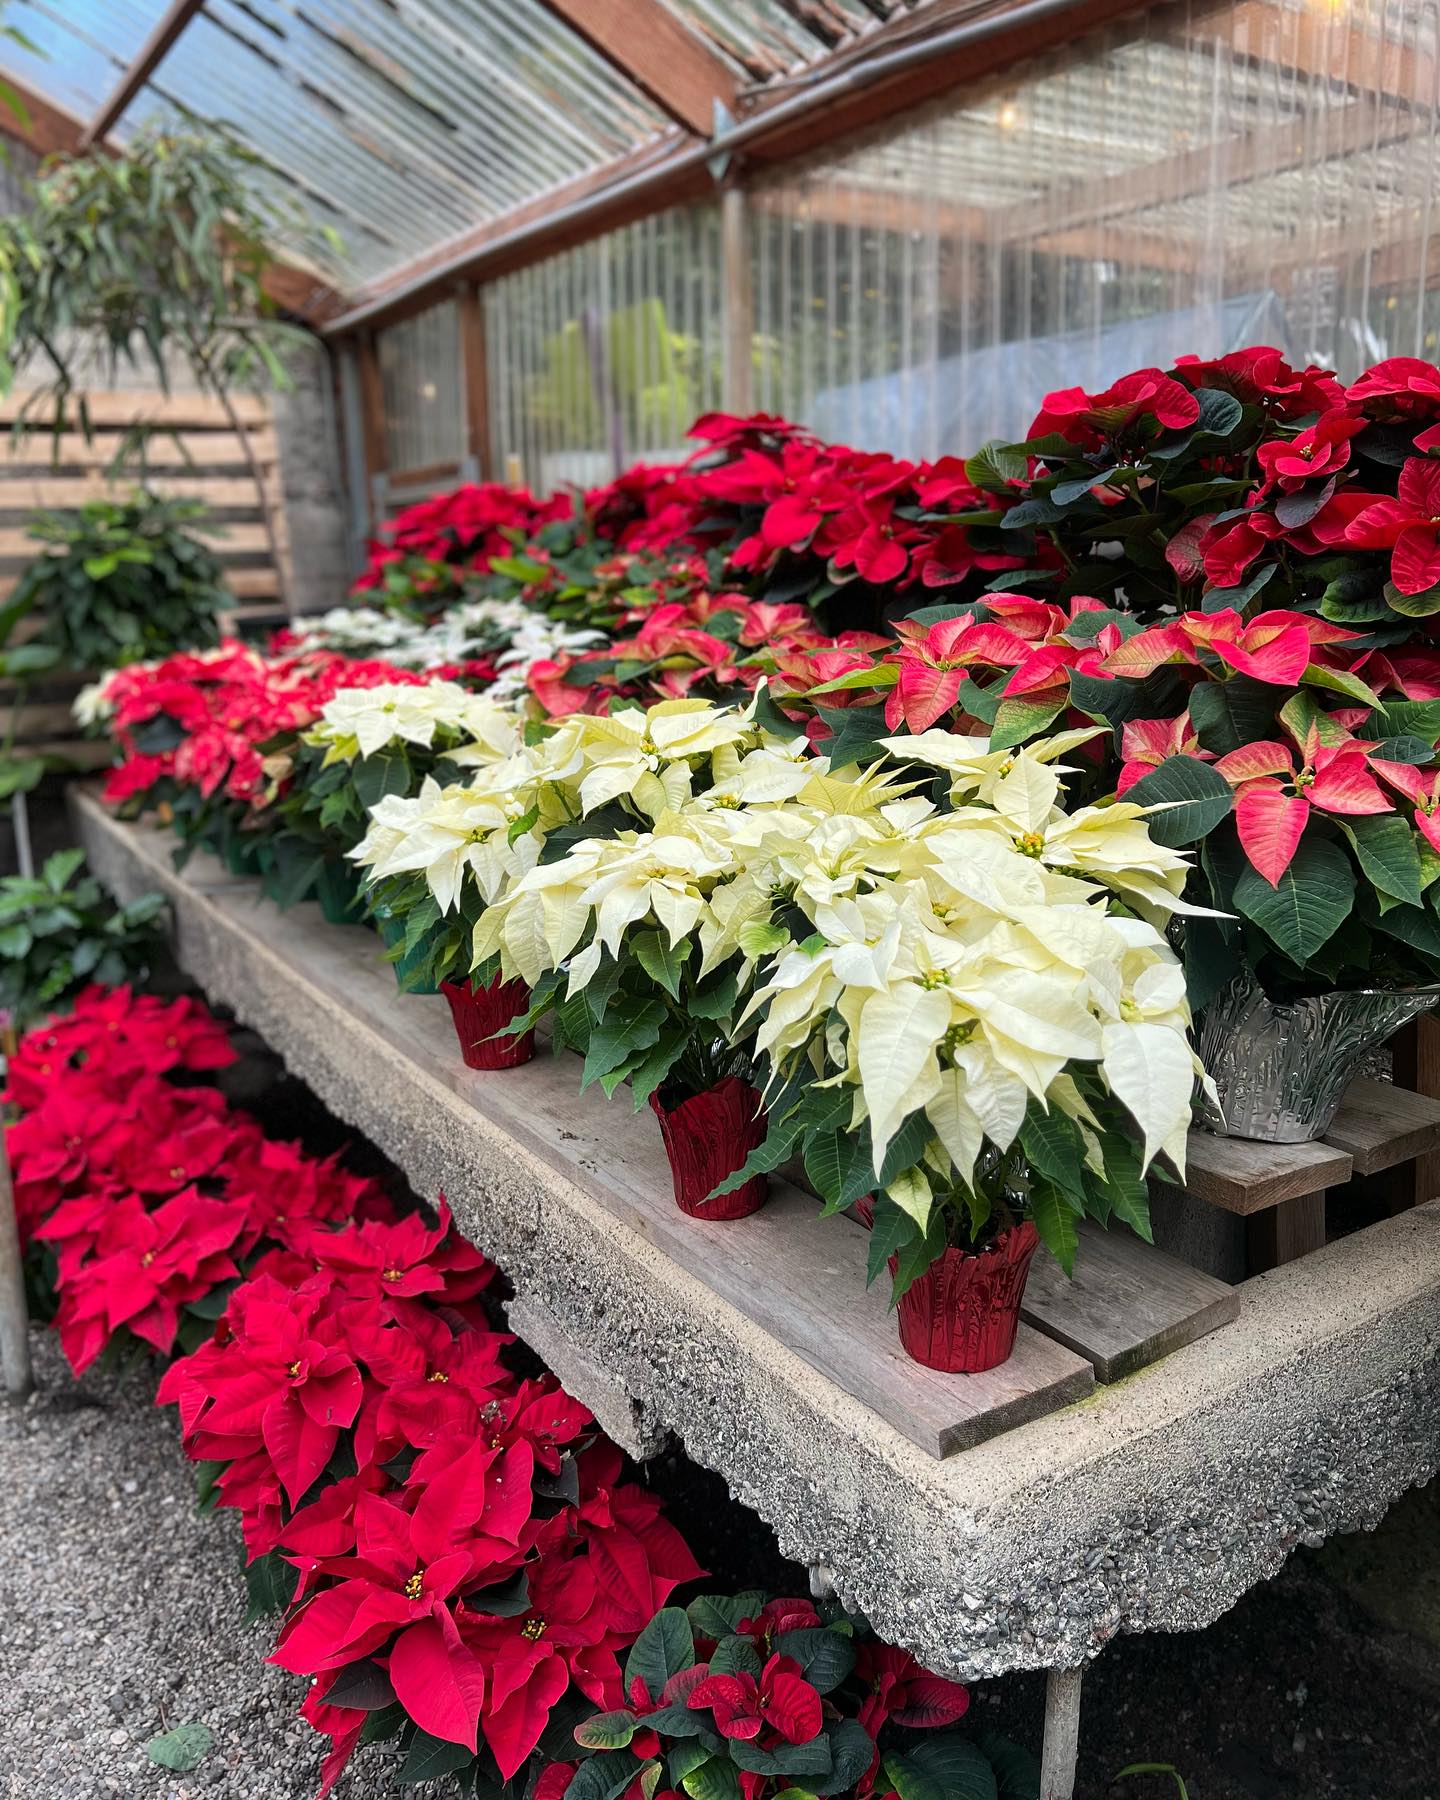 Poinsettas at Dragonfly Farm and Nursery in Langlois, Oregon